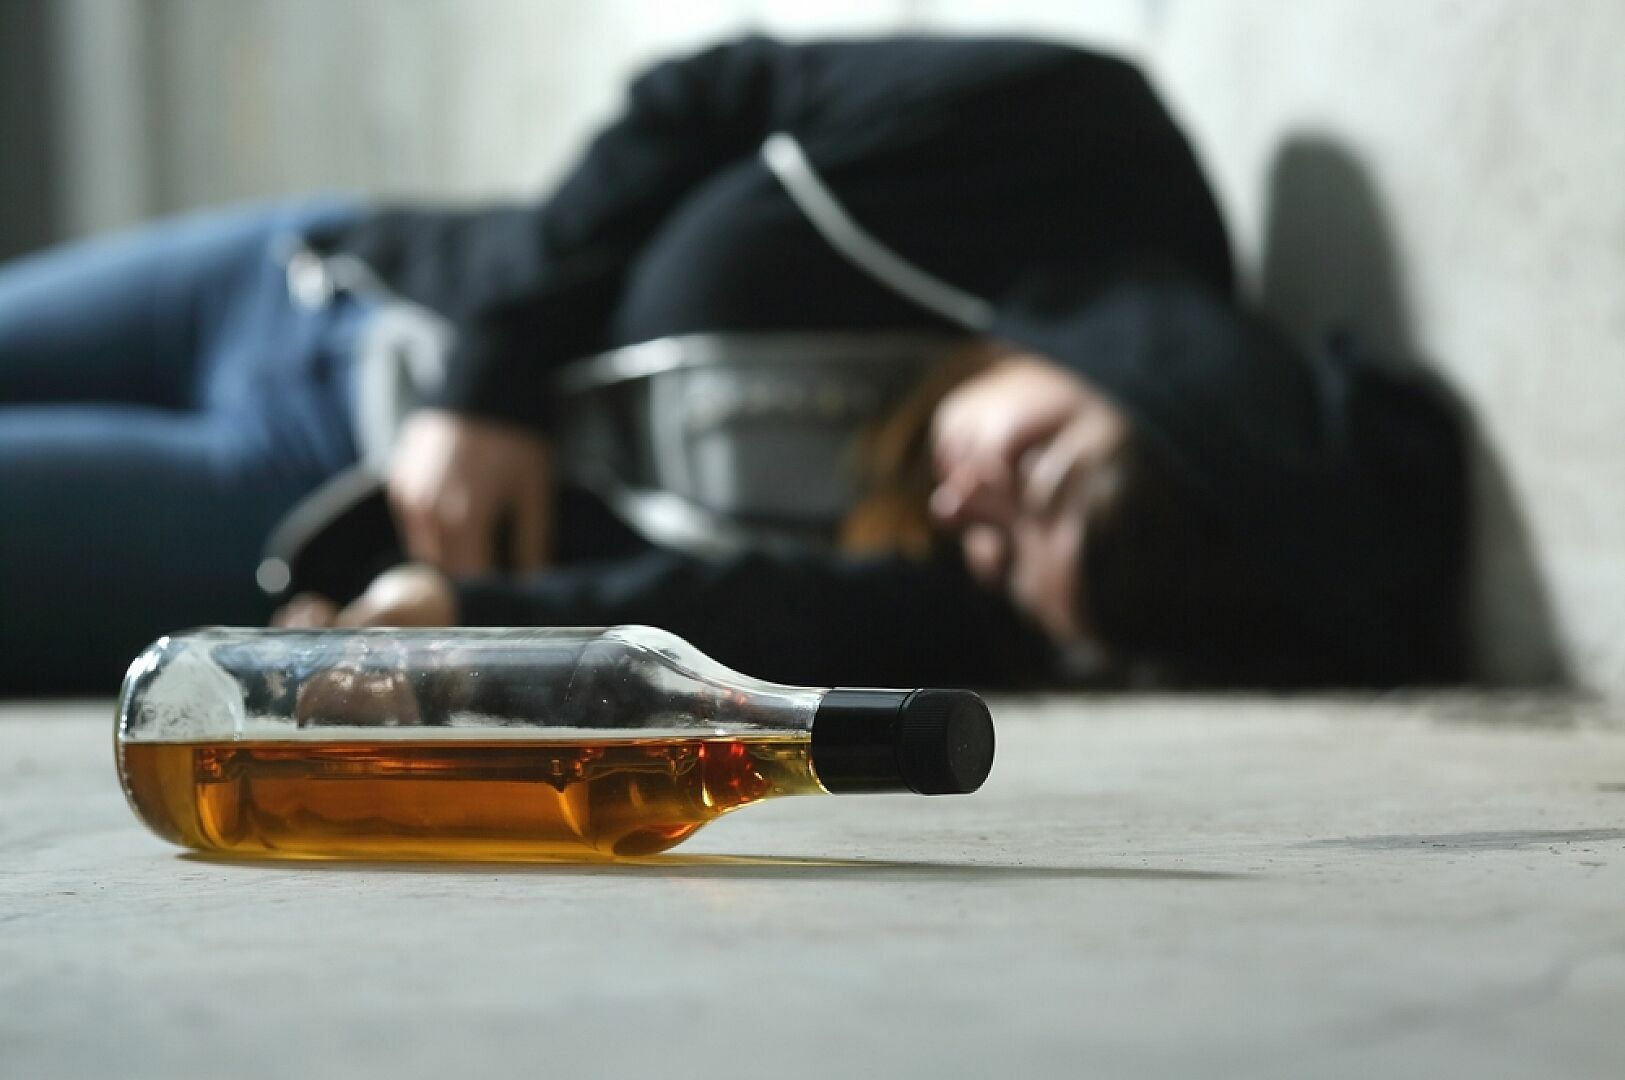 Over a million citizens die every year because of alcohol and drugs